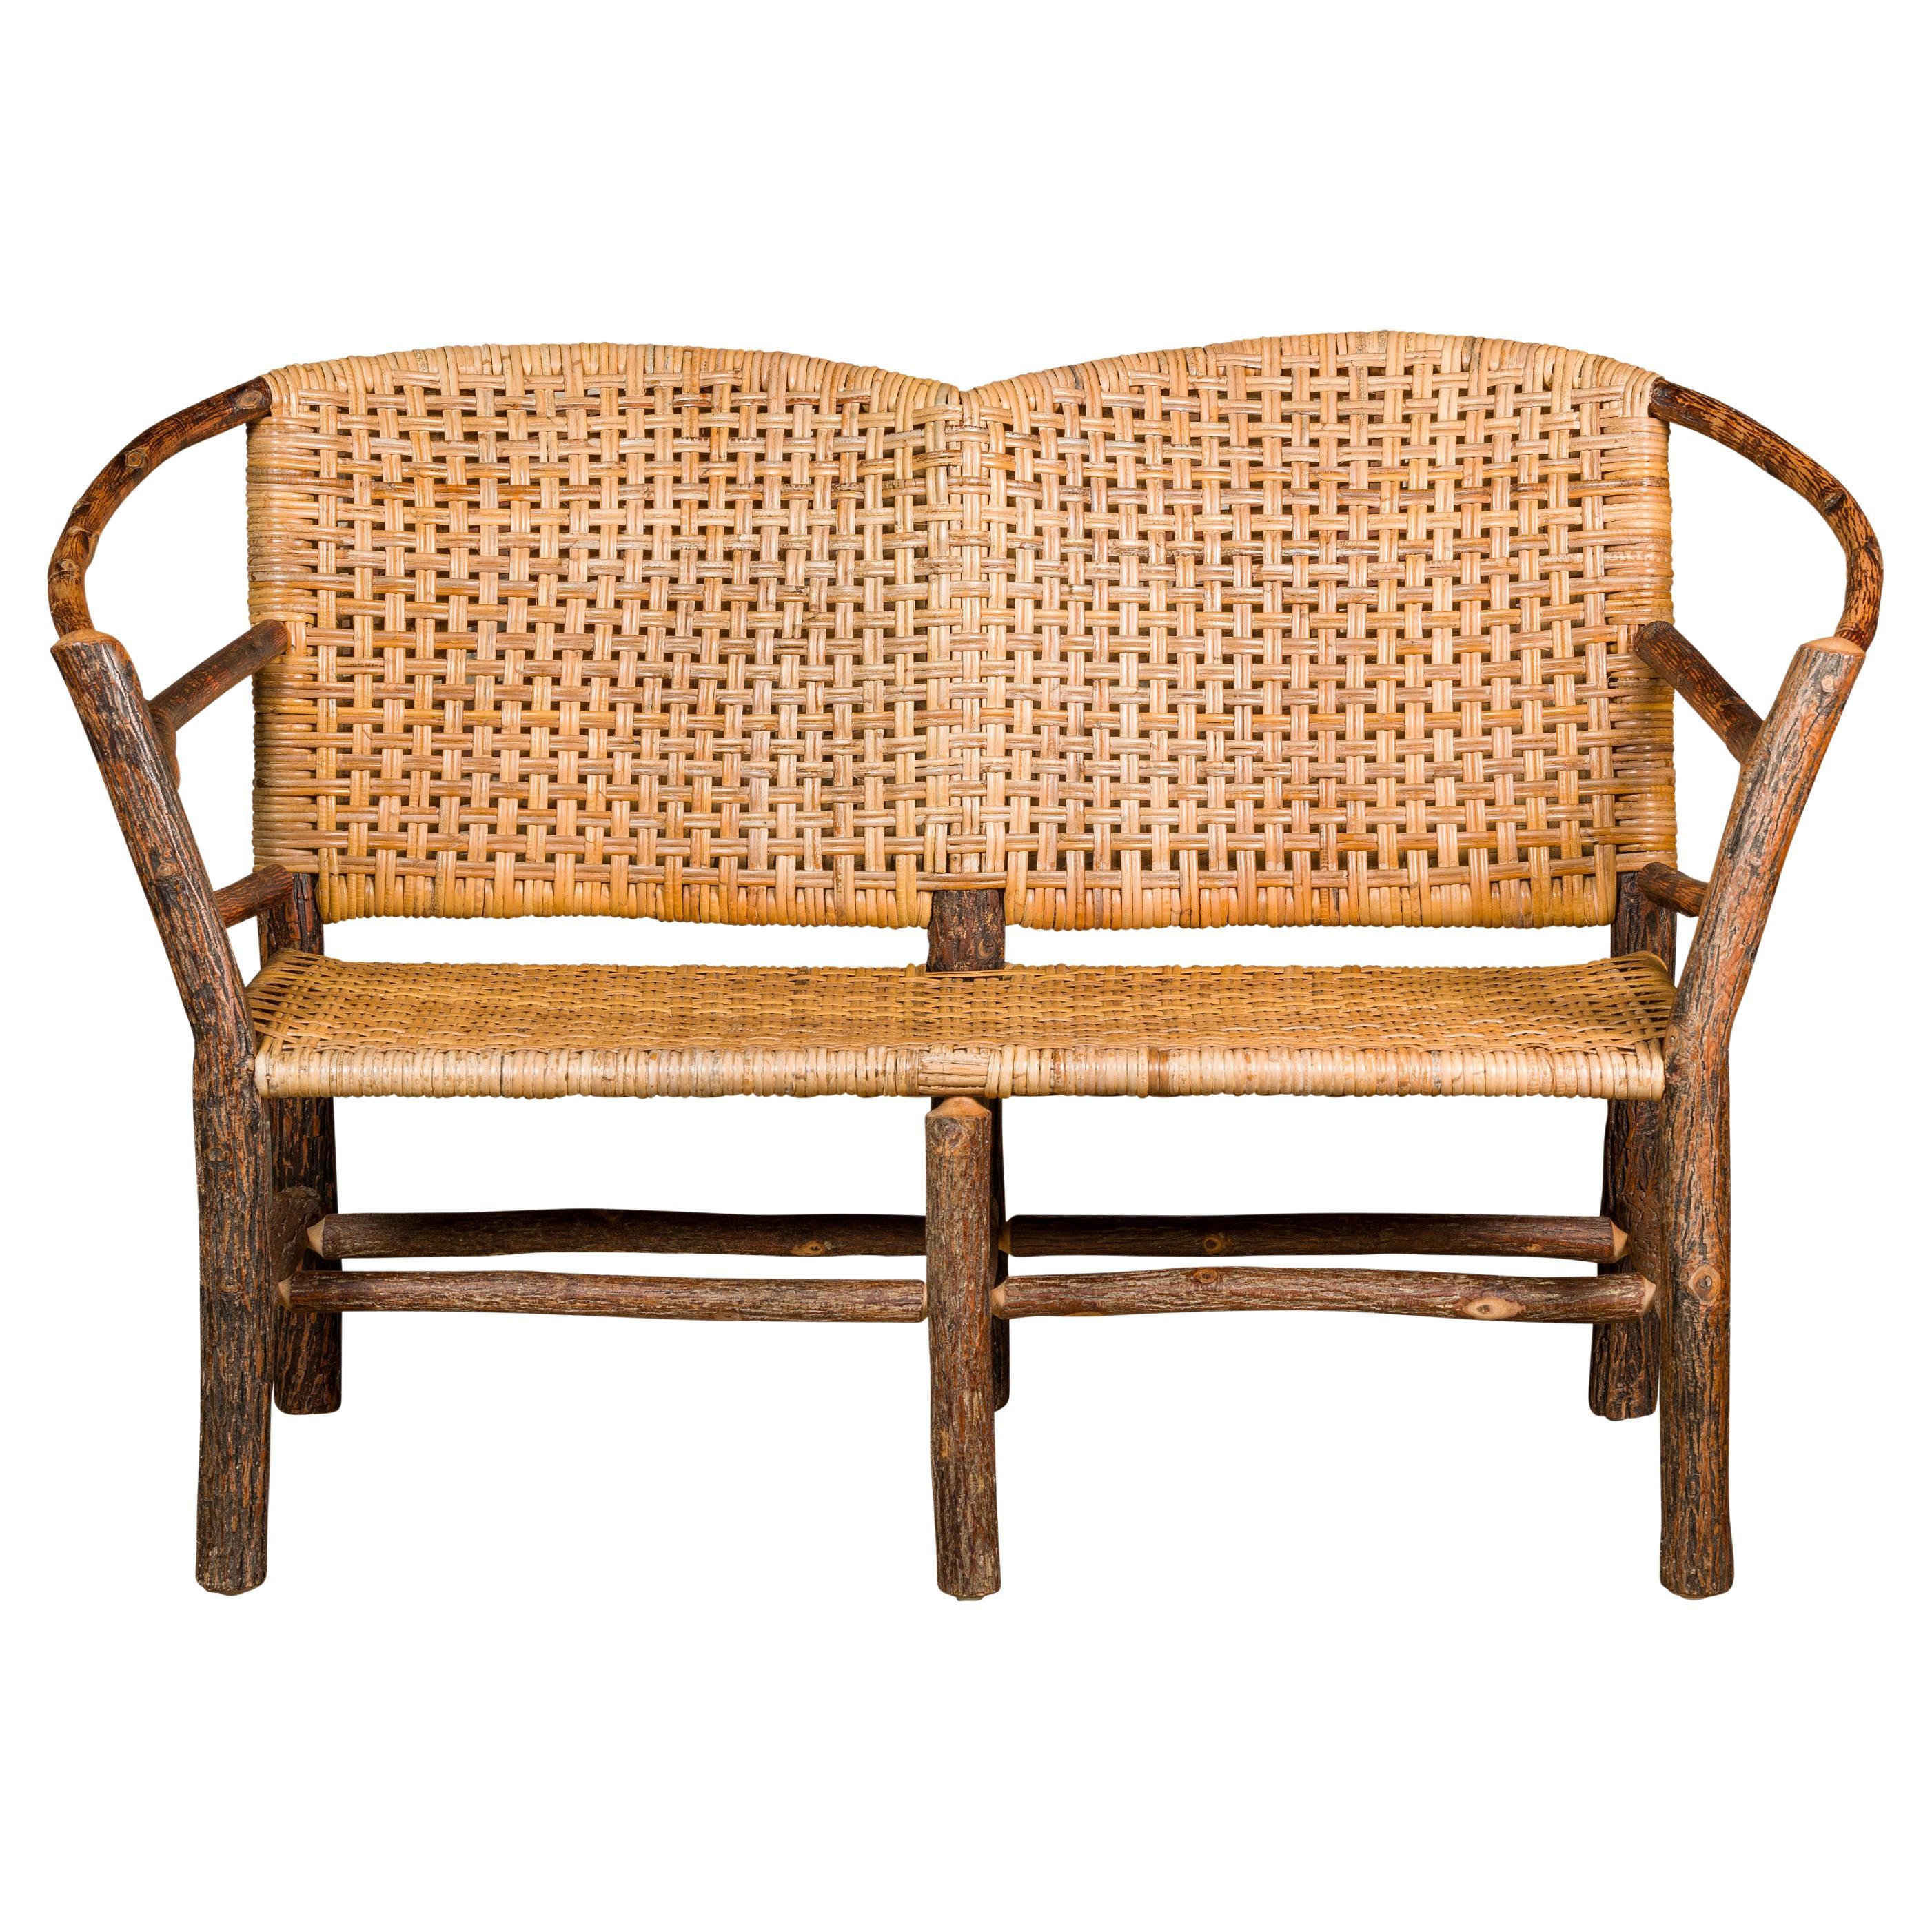 Vintage Old Hickory Hoop Settee with Woven Rattan Back and Seat